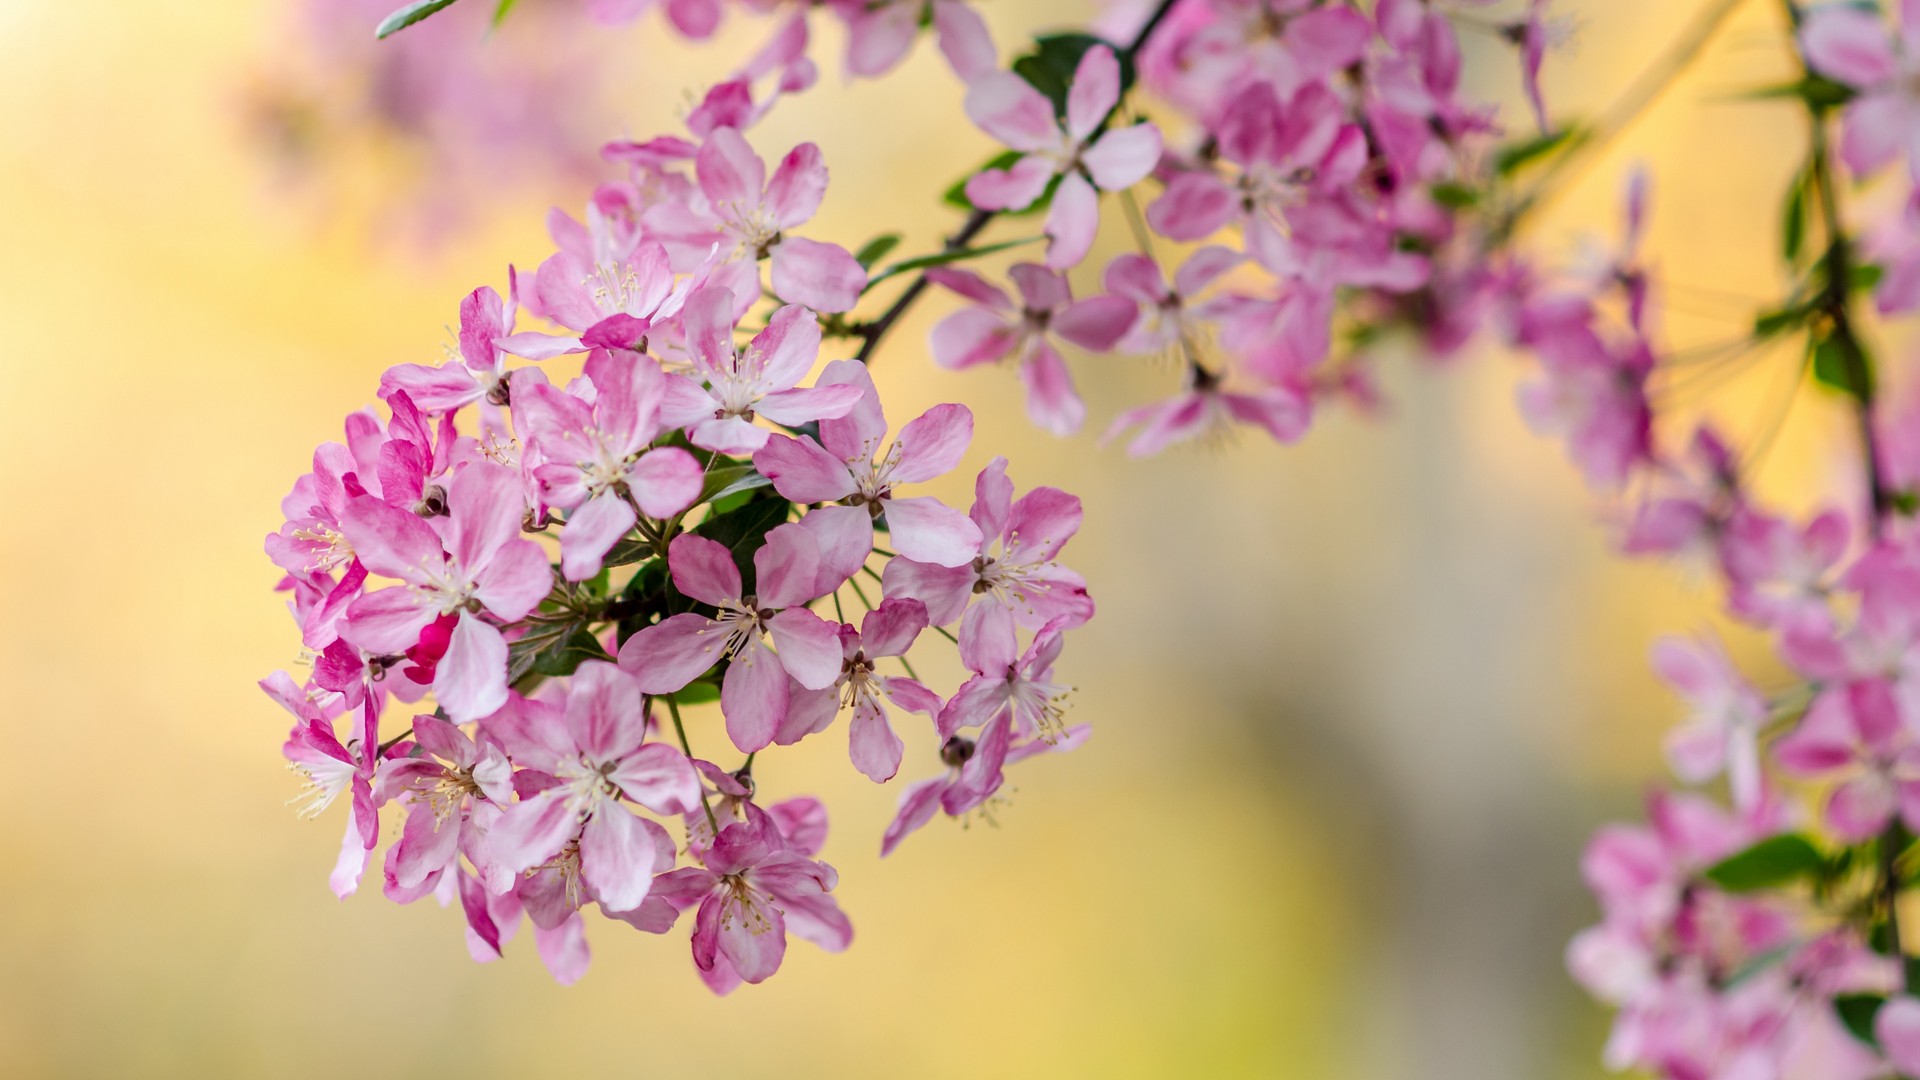 Spring Flowers Background Wallpaper HD 1920x1080